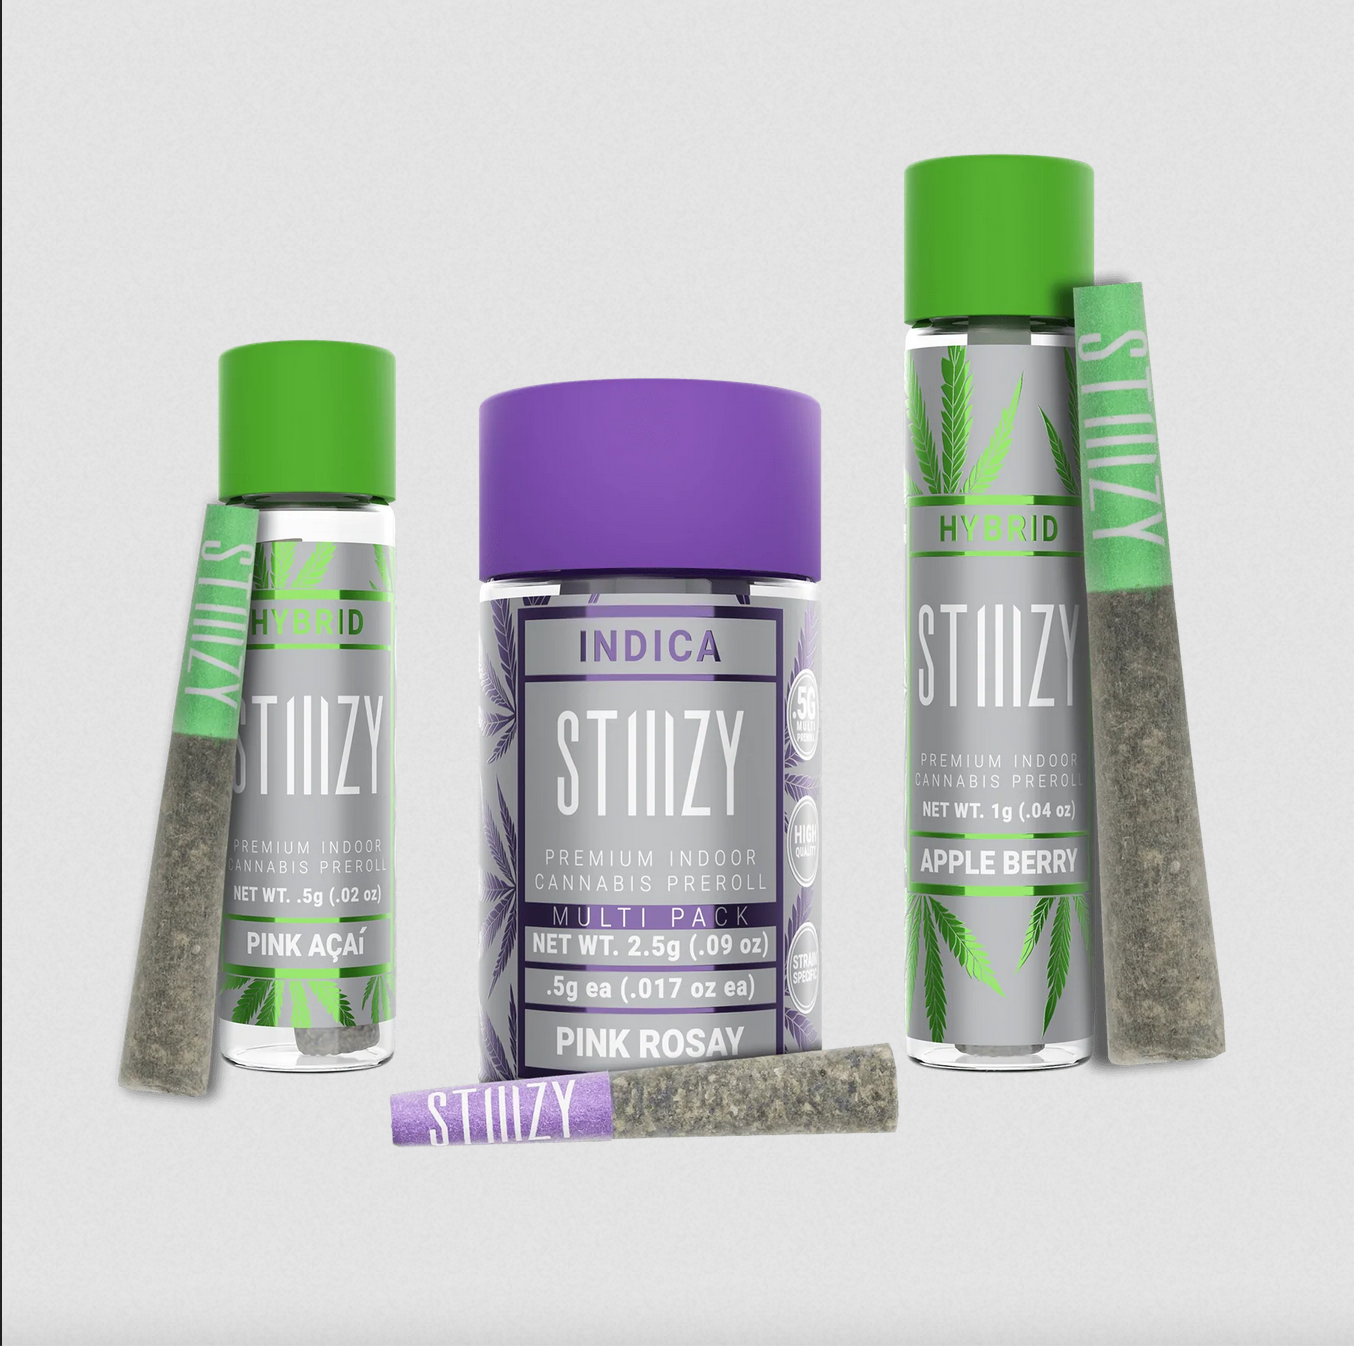 Pre-rolls with premium hybrid or indica cannabis flower stand or lie next to their jars.